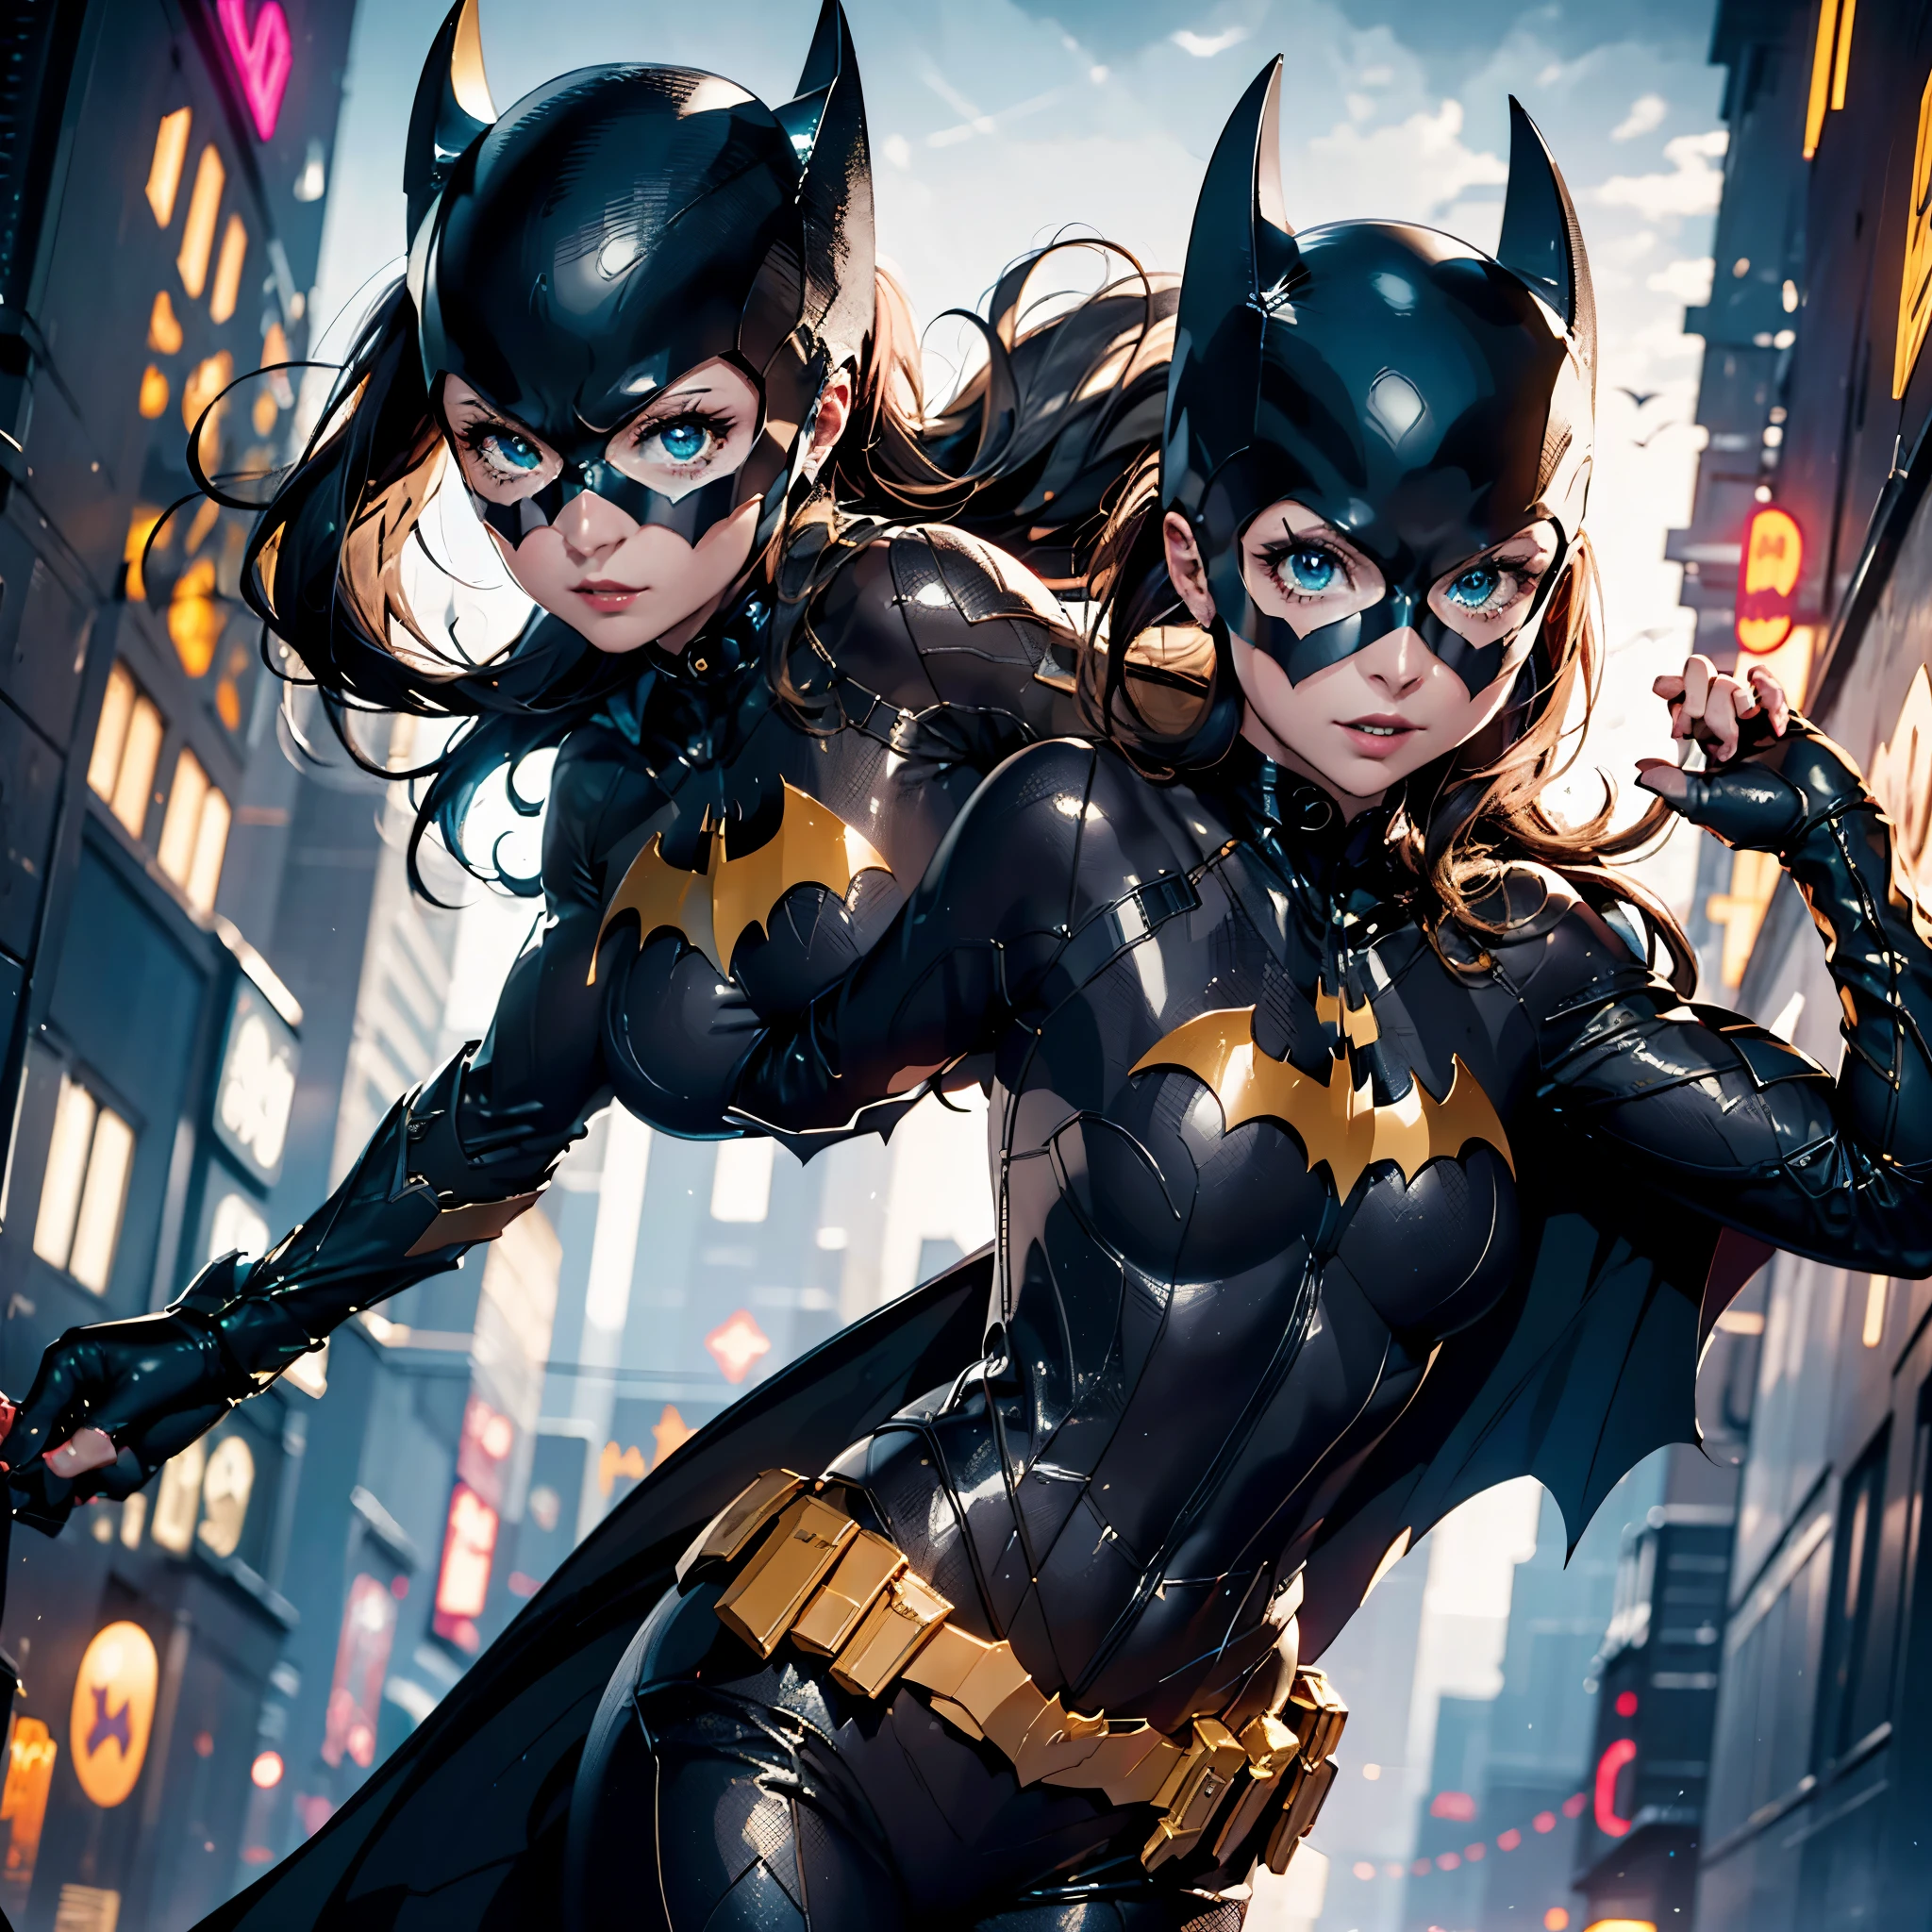 Title: "Gotham's Guardian: Batgirl's Nocturnal Vigil"

Description: Illustrate Batgirl in a dynamic anime style, capturing her essence as Gotham's nighttime protector. 

**Character Appearance:**
1. **Costume:** Batgirl is clad in her iconic black and gold costume. The design should be sleek and modern, with attention to detail on the bat-symbol across her chest.
2. **Cowl:** Her cowl should frame a determined and focused face, with piercing blue eyes visible.
3. **Pose:** Batgirl is in a poised action stance, one foot slightly forward, as if ready to leap into action. She holds a grappling hook with one hand and a batarang in the other.
4. **Gadgets:** Include a visible utility belt equipped with various crime-fighting tools and gadgets.

**Background:**
1. **Setting:** Set the scene against the backdrop of Gotham City at night. Skyscrapers should loom in the distance, with hints of the Bat-Signal illuminating the dark sky.
2. **Mood Lighting:** Use dramatic lighting to enhance the atmosphere, emphasizing the contrast between the shadows and the highlights on Batgirl's costume.
3. **Cityscape:** Incorporate Gotham's gritty urban environment with details like alleyways and rooftop structures.

**Additional Elements:**
1. **Dynamic Elements:** Add a sense of movement to the artwork - perhaps a fluttering cape or the subtle motion lines around Batgirl to convey speed and agility.
2. **Subtle Rain:** Integrate a light rain effect to add texture and enhance the noir aesthetic, with raindrops glistening on Batgirl's costume.
3. **Incorporate Bat-Signal:** Position the Bat-Signal prominently in the sky, casting a dynamic glow on the surroundings.

Feel free to let your artistic interpretation shine, capturing the essence of Batgirl as a formidable and stylish protector of Gotham City.